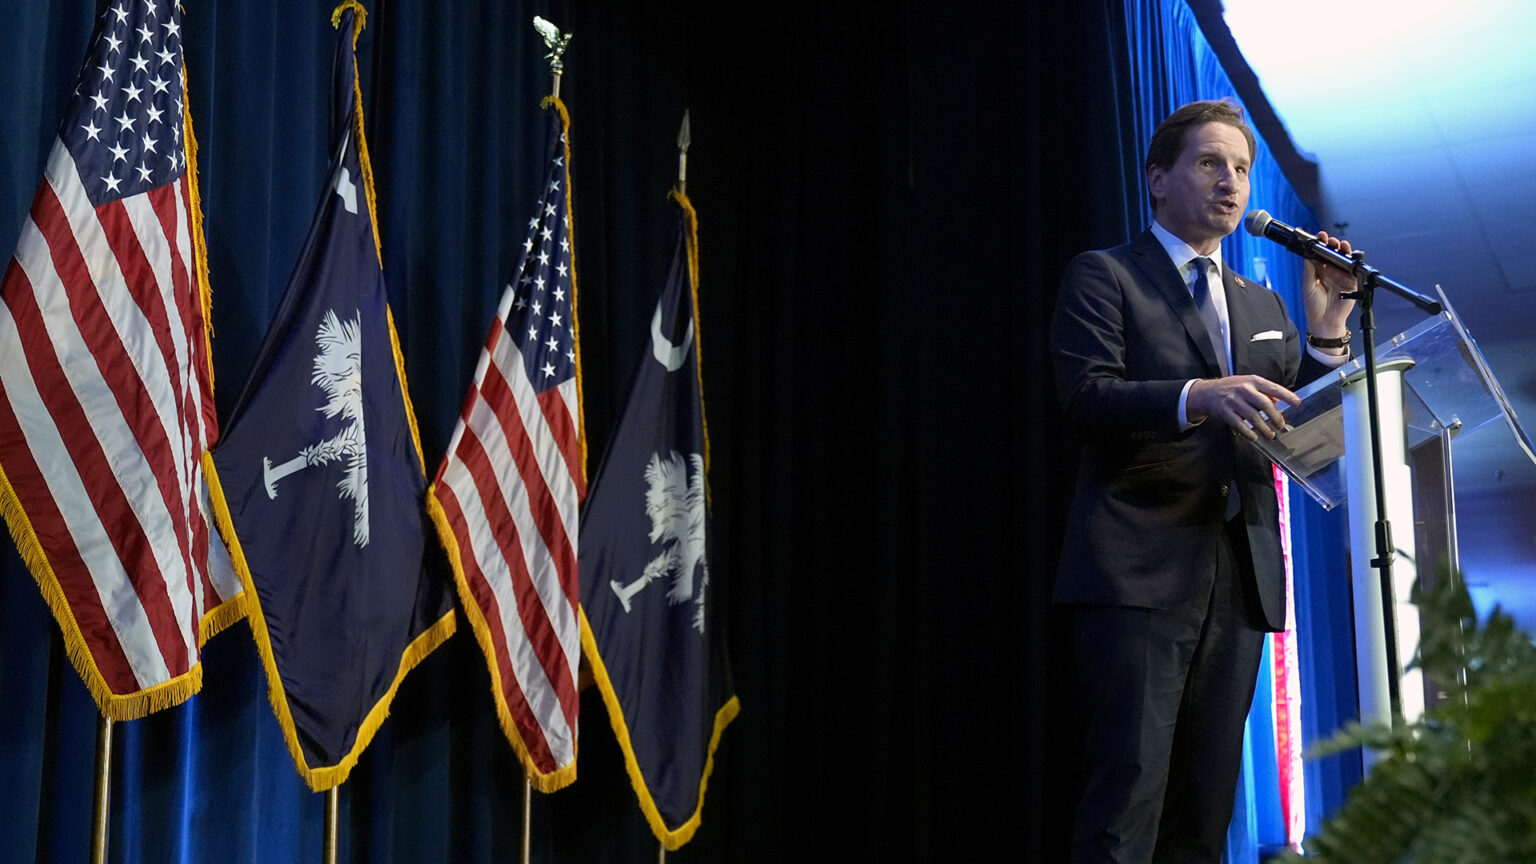 Dean Phillips speaks while holding a microphone mounted to a podium with a transparent surface, with an out-of-focus plant in the foreground and two South Carolina, two U.S. flags and a stage curtain in the background.